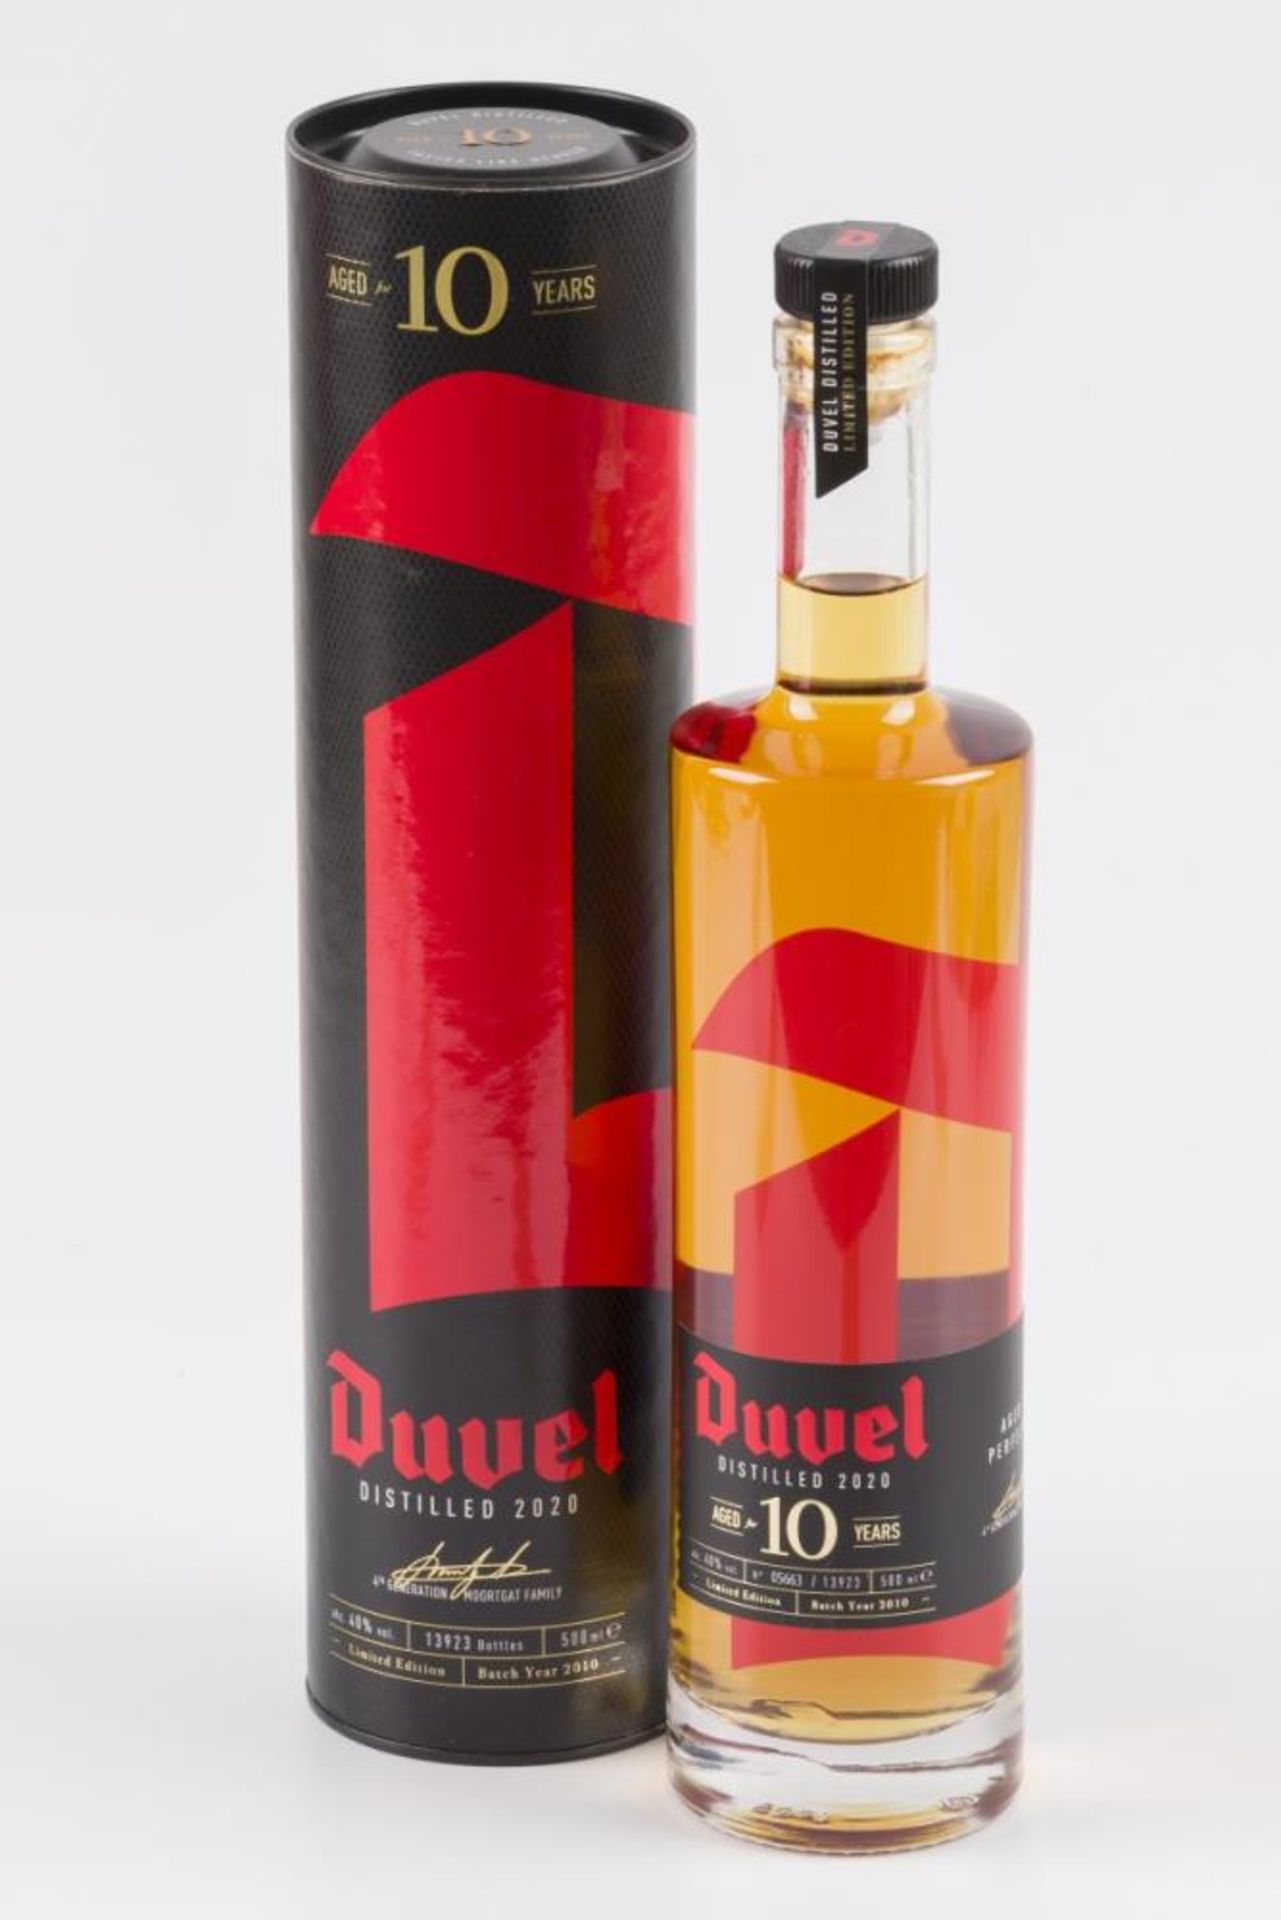 Duvel 10 years old Distilled Limited Edition 2020 - 50cl